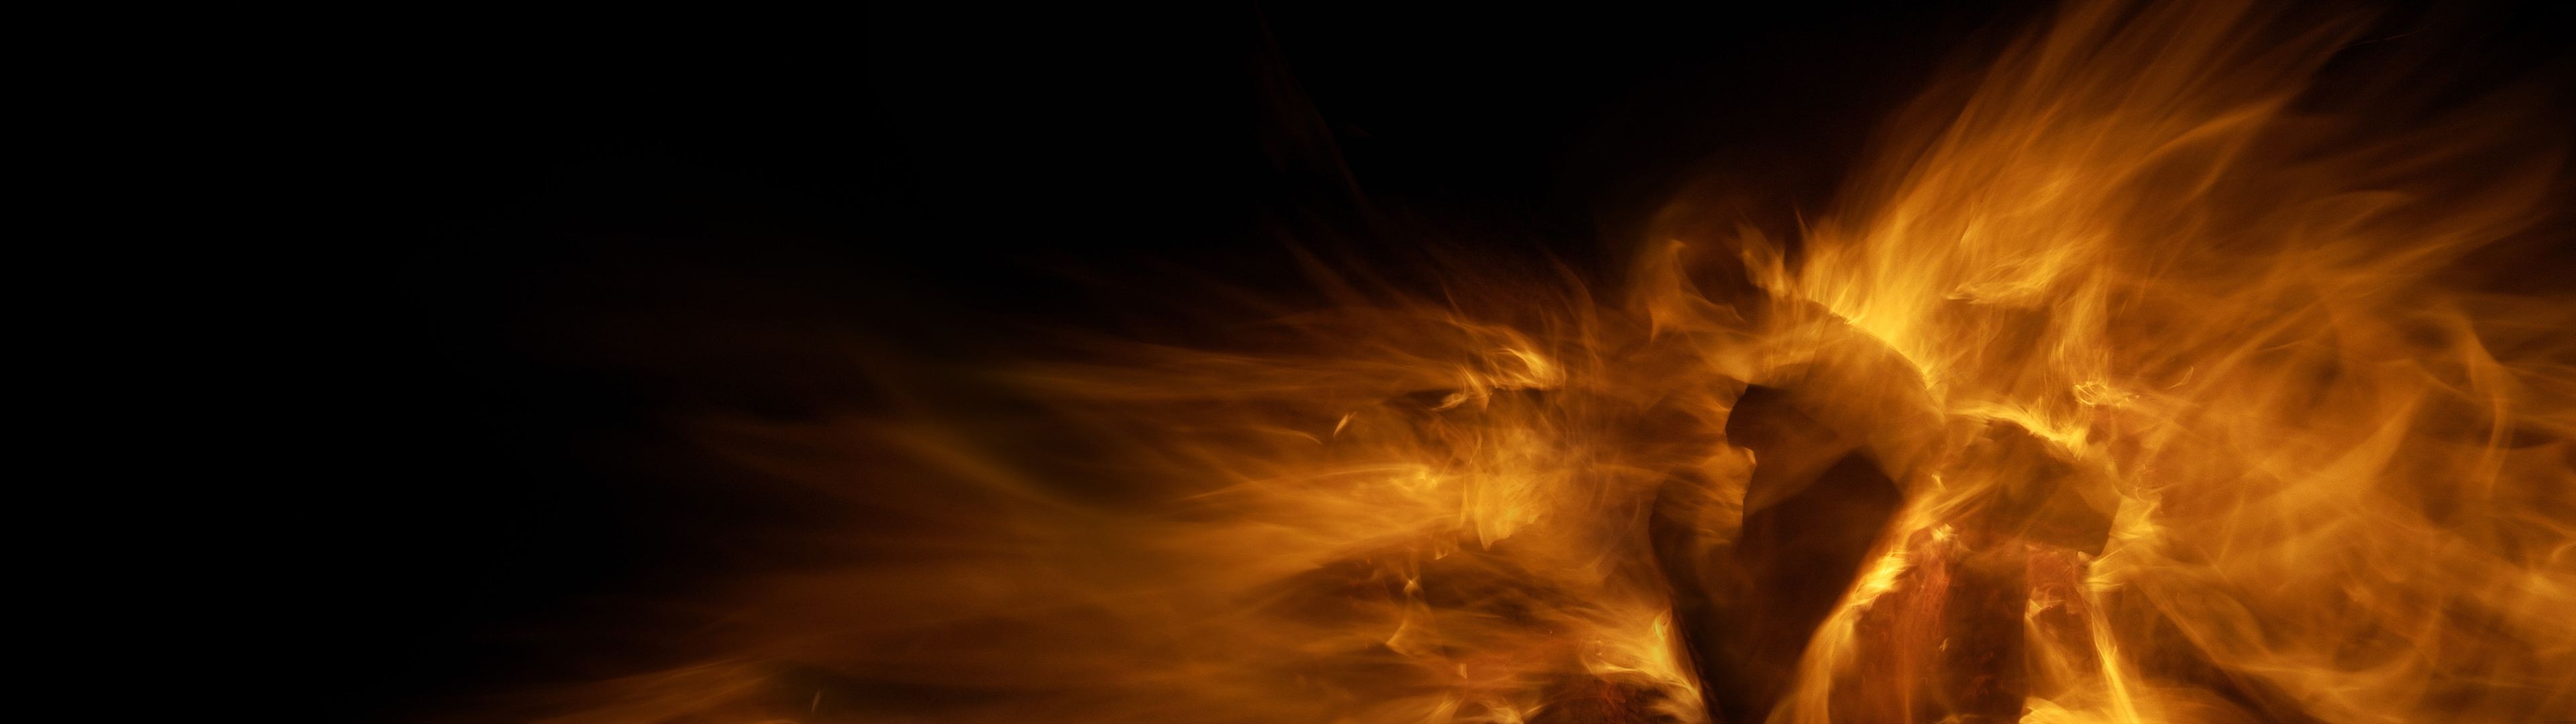 multiple Display, Abstract, Digital Art, Fire, Colorful Wallpapers HD